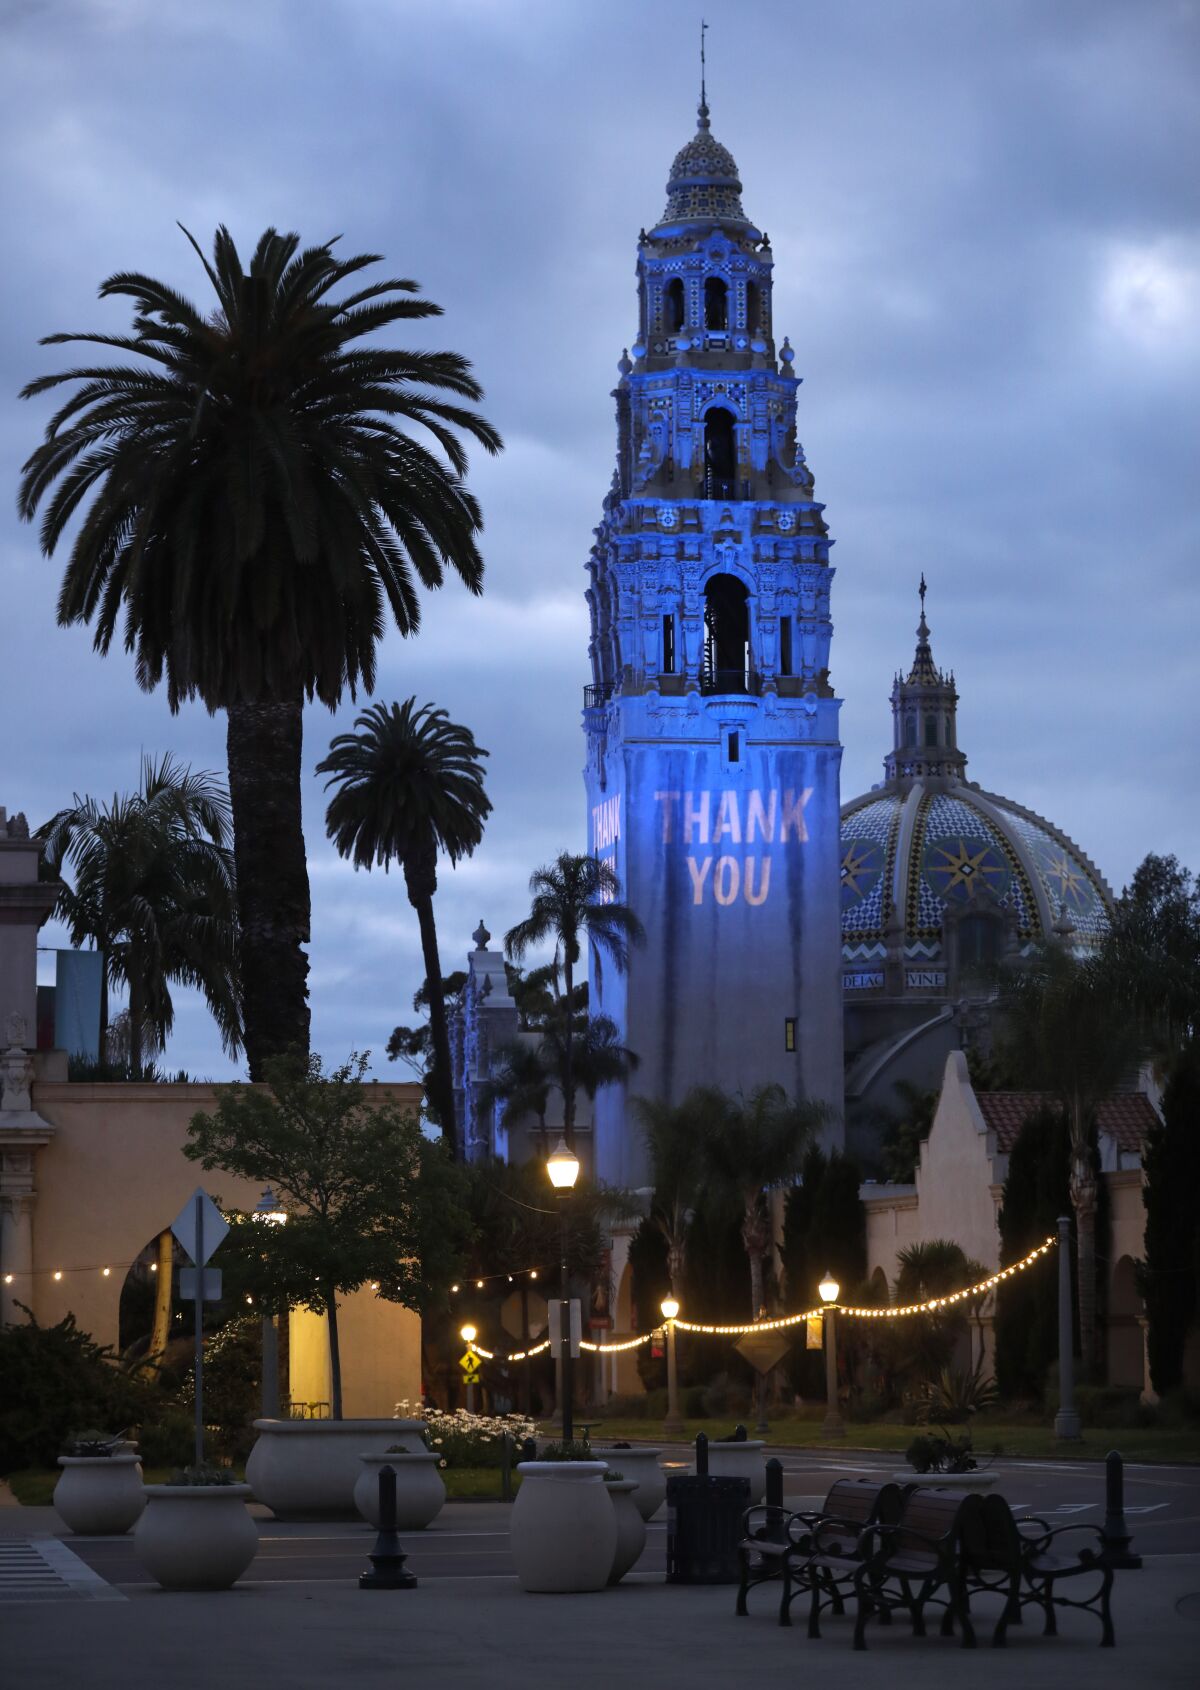 The California Tower at the Museum of Man in Balboa Park April 12, 2020.